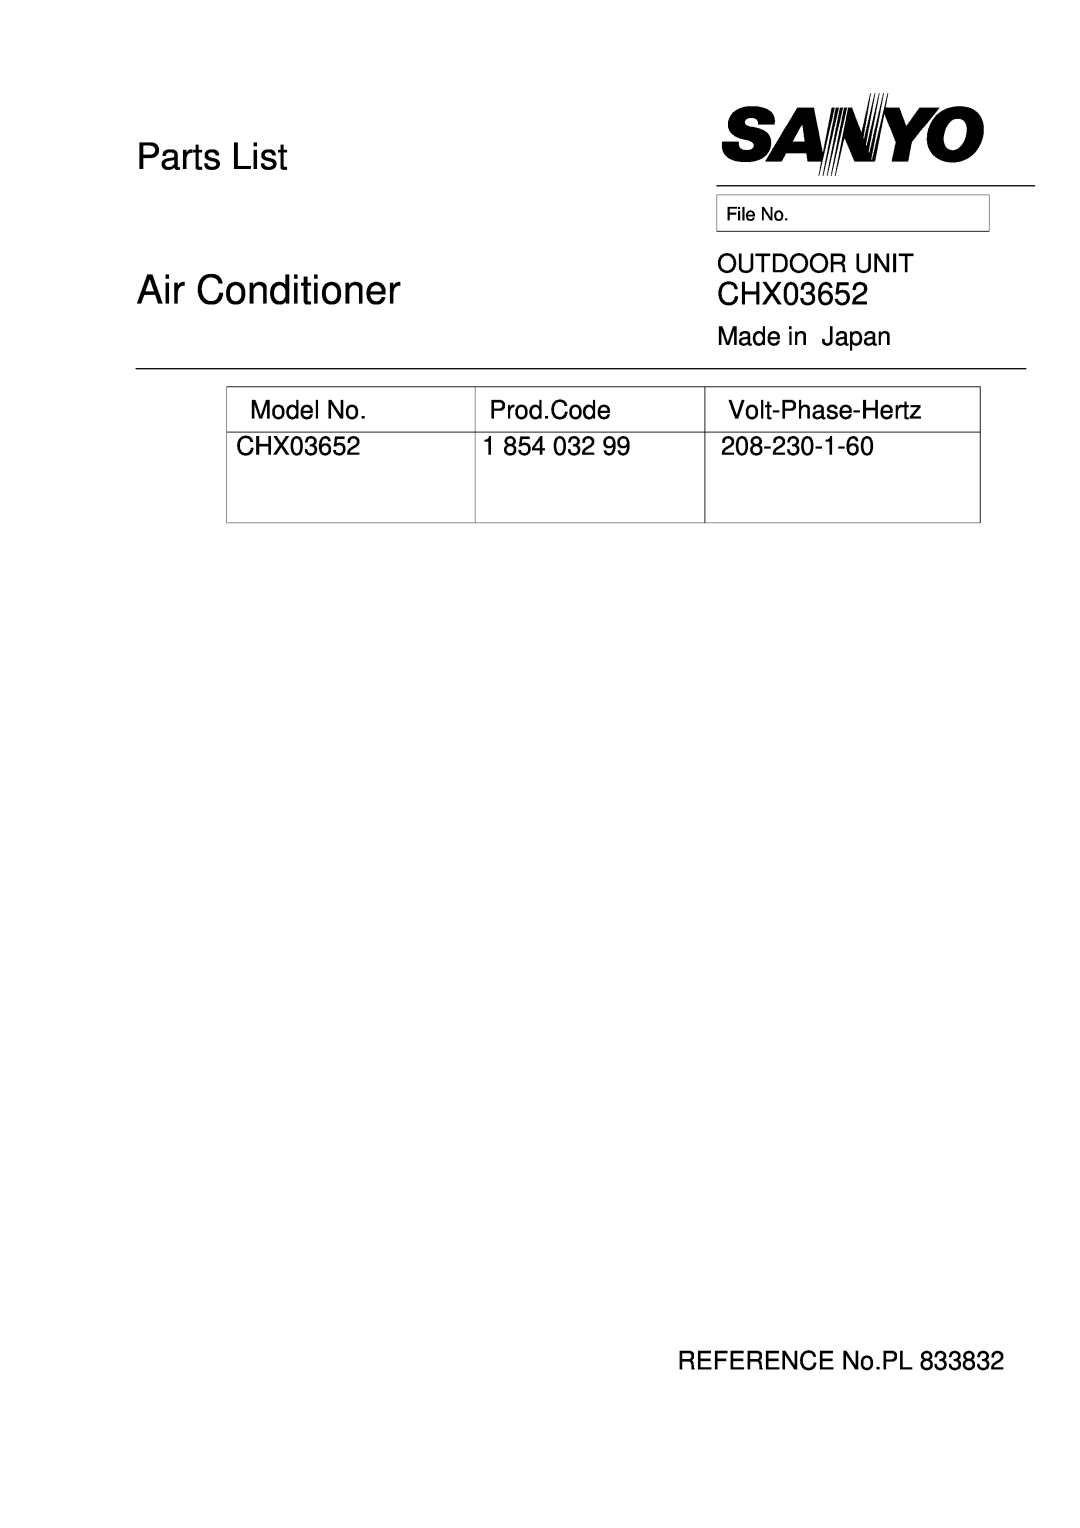 Sanyo manual Air Conditioner, Parts List, Outdoor Unit, Made in Japan, Model No. CHX03652, Prod.Code, Volt-Phase-Hertz 